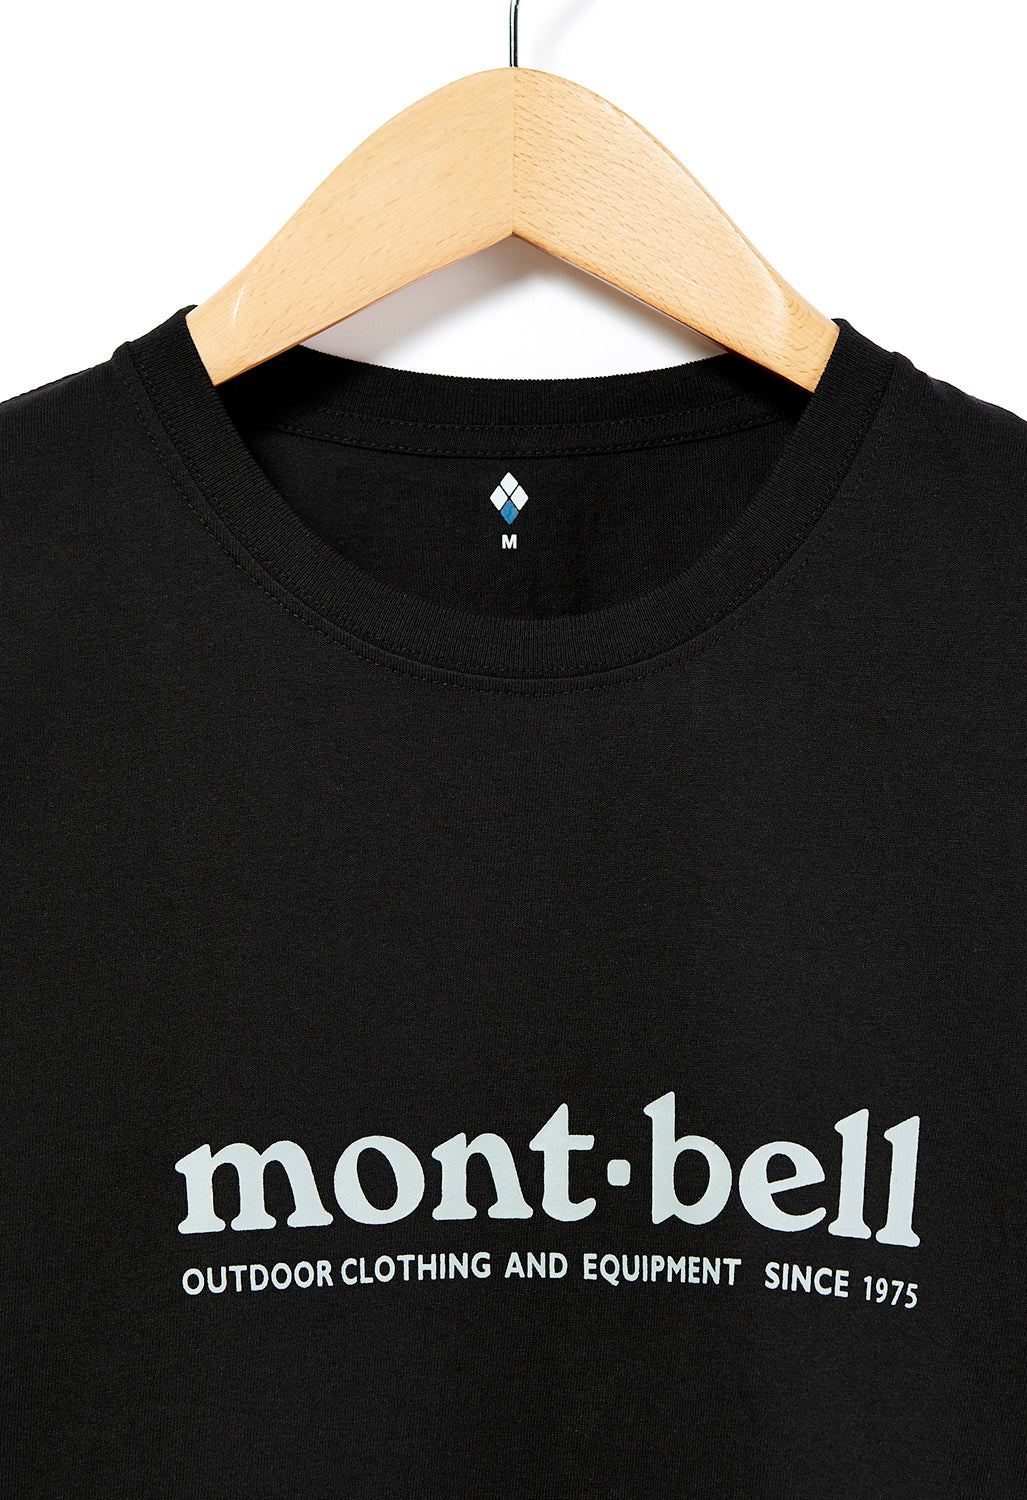 Montbell Pear Skin Cotton mont-bell T-Shirt - Black – Outsiders Store UK